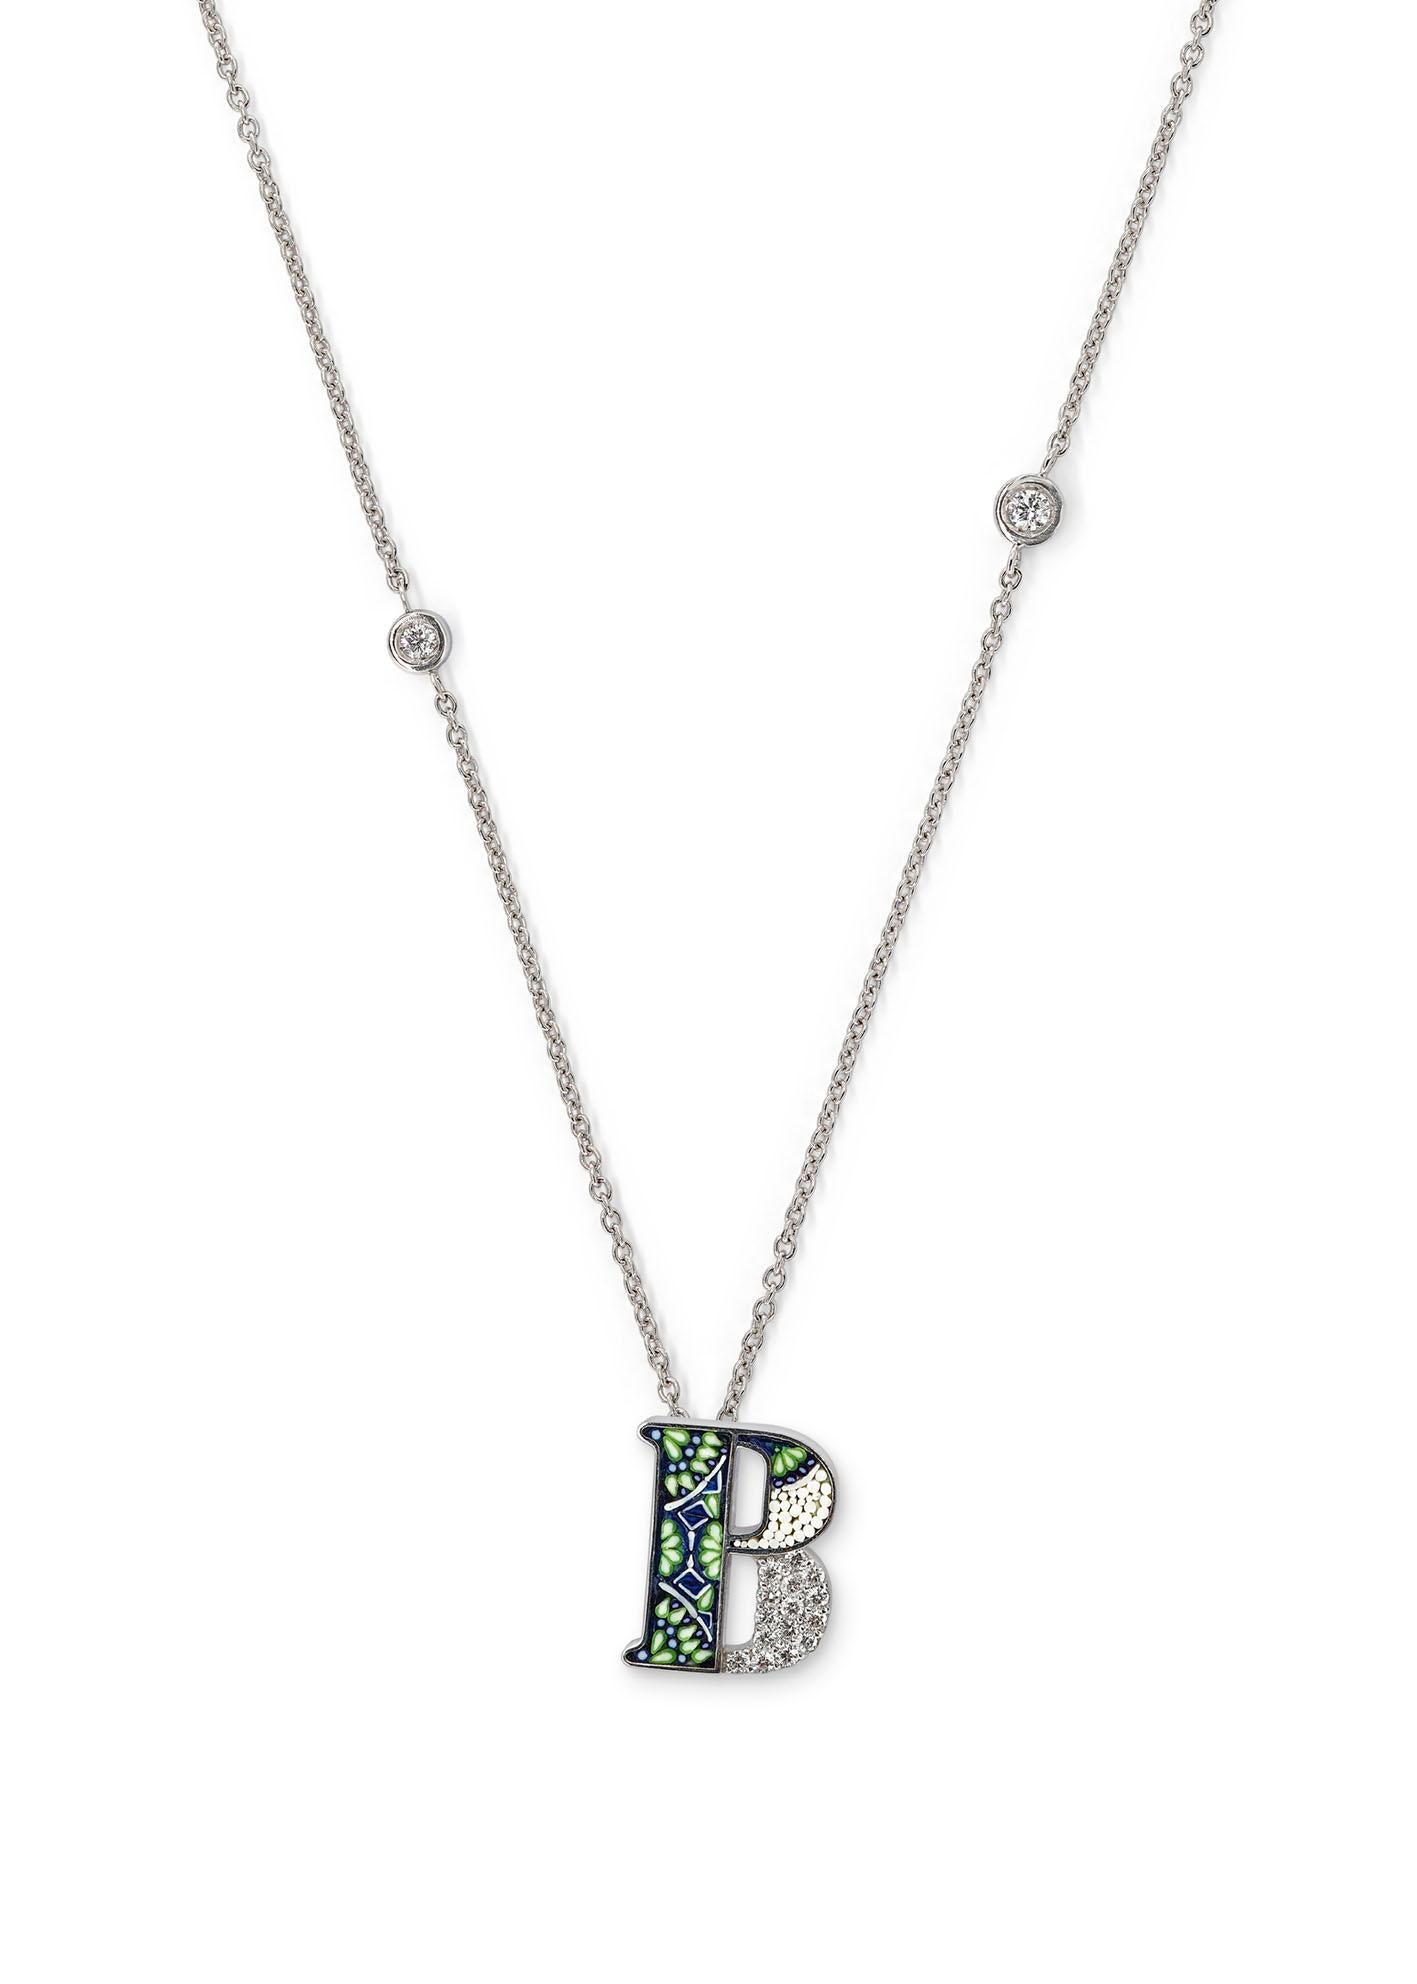 Brilliant Cut Necklace Letter B White Gold White Diamonds Hand Decorated with Micromosaic For Sale